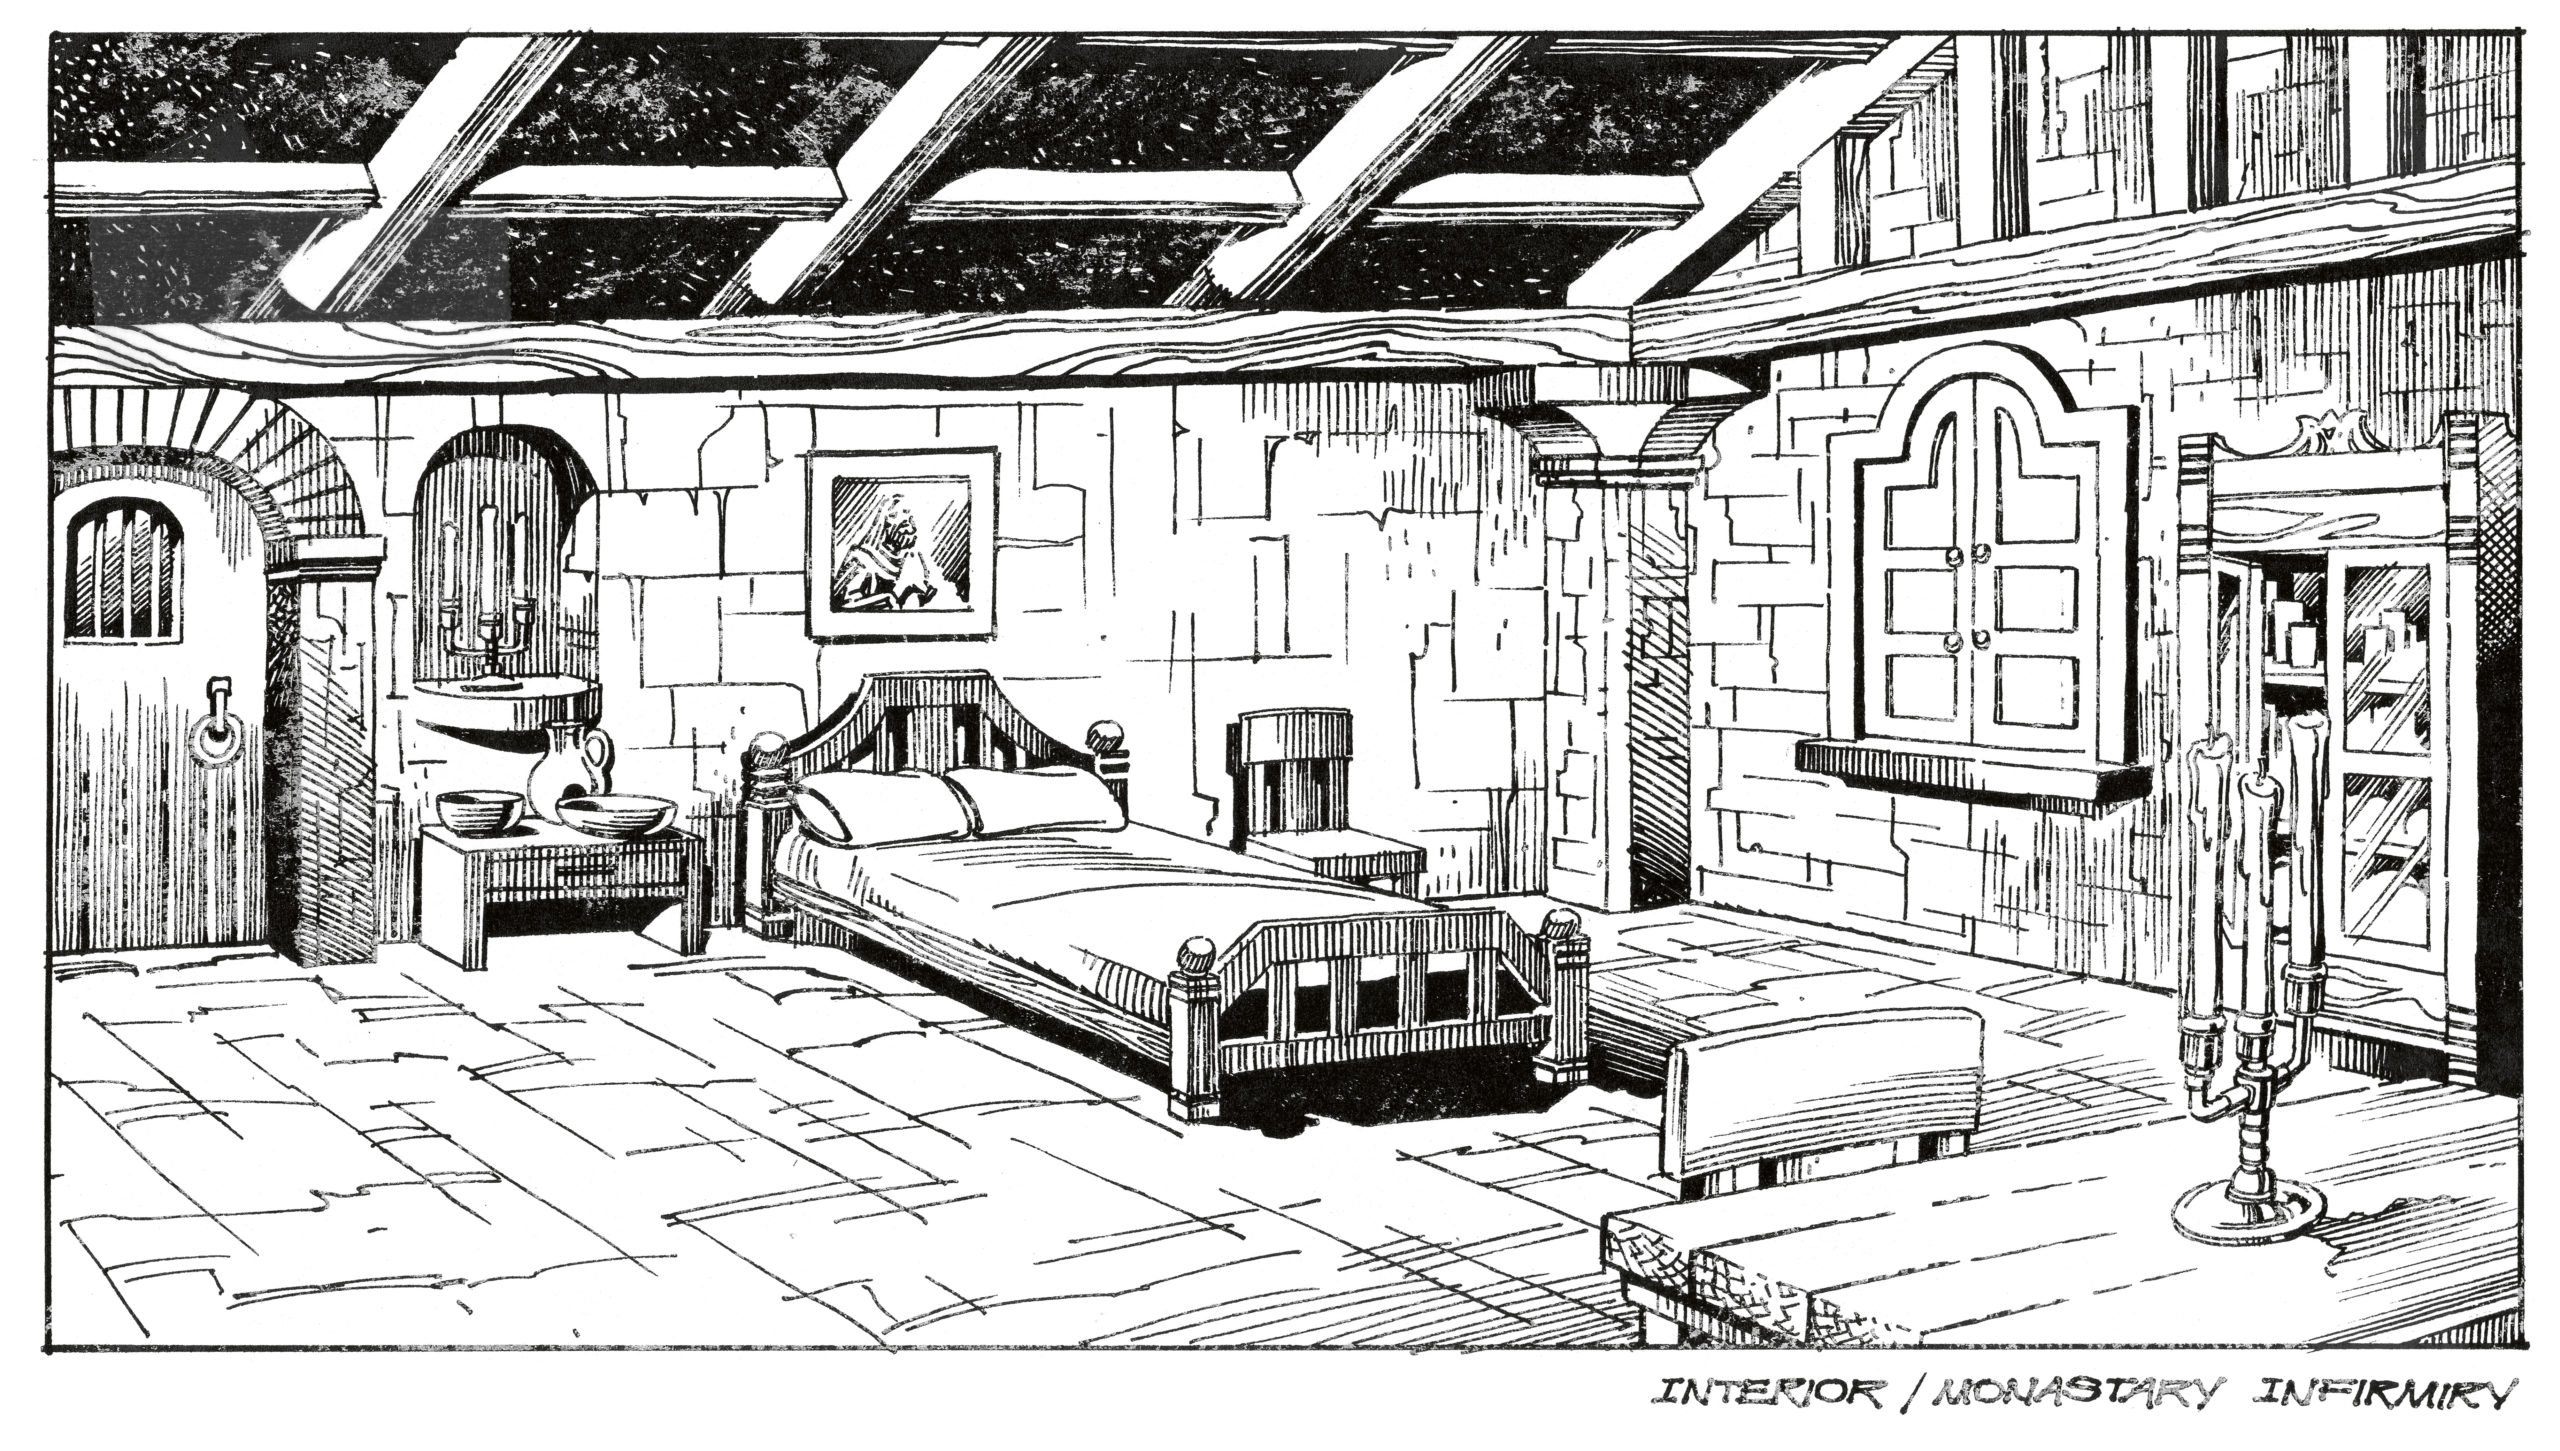 Interiors of a monastery bedroom. (Illustration: Squillace, Pat Agnasin, Abrams)